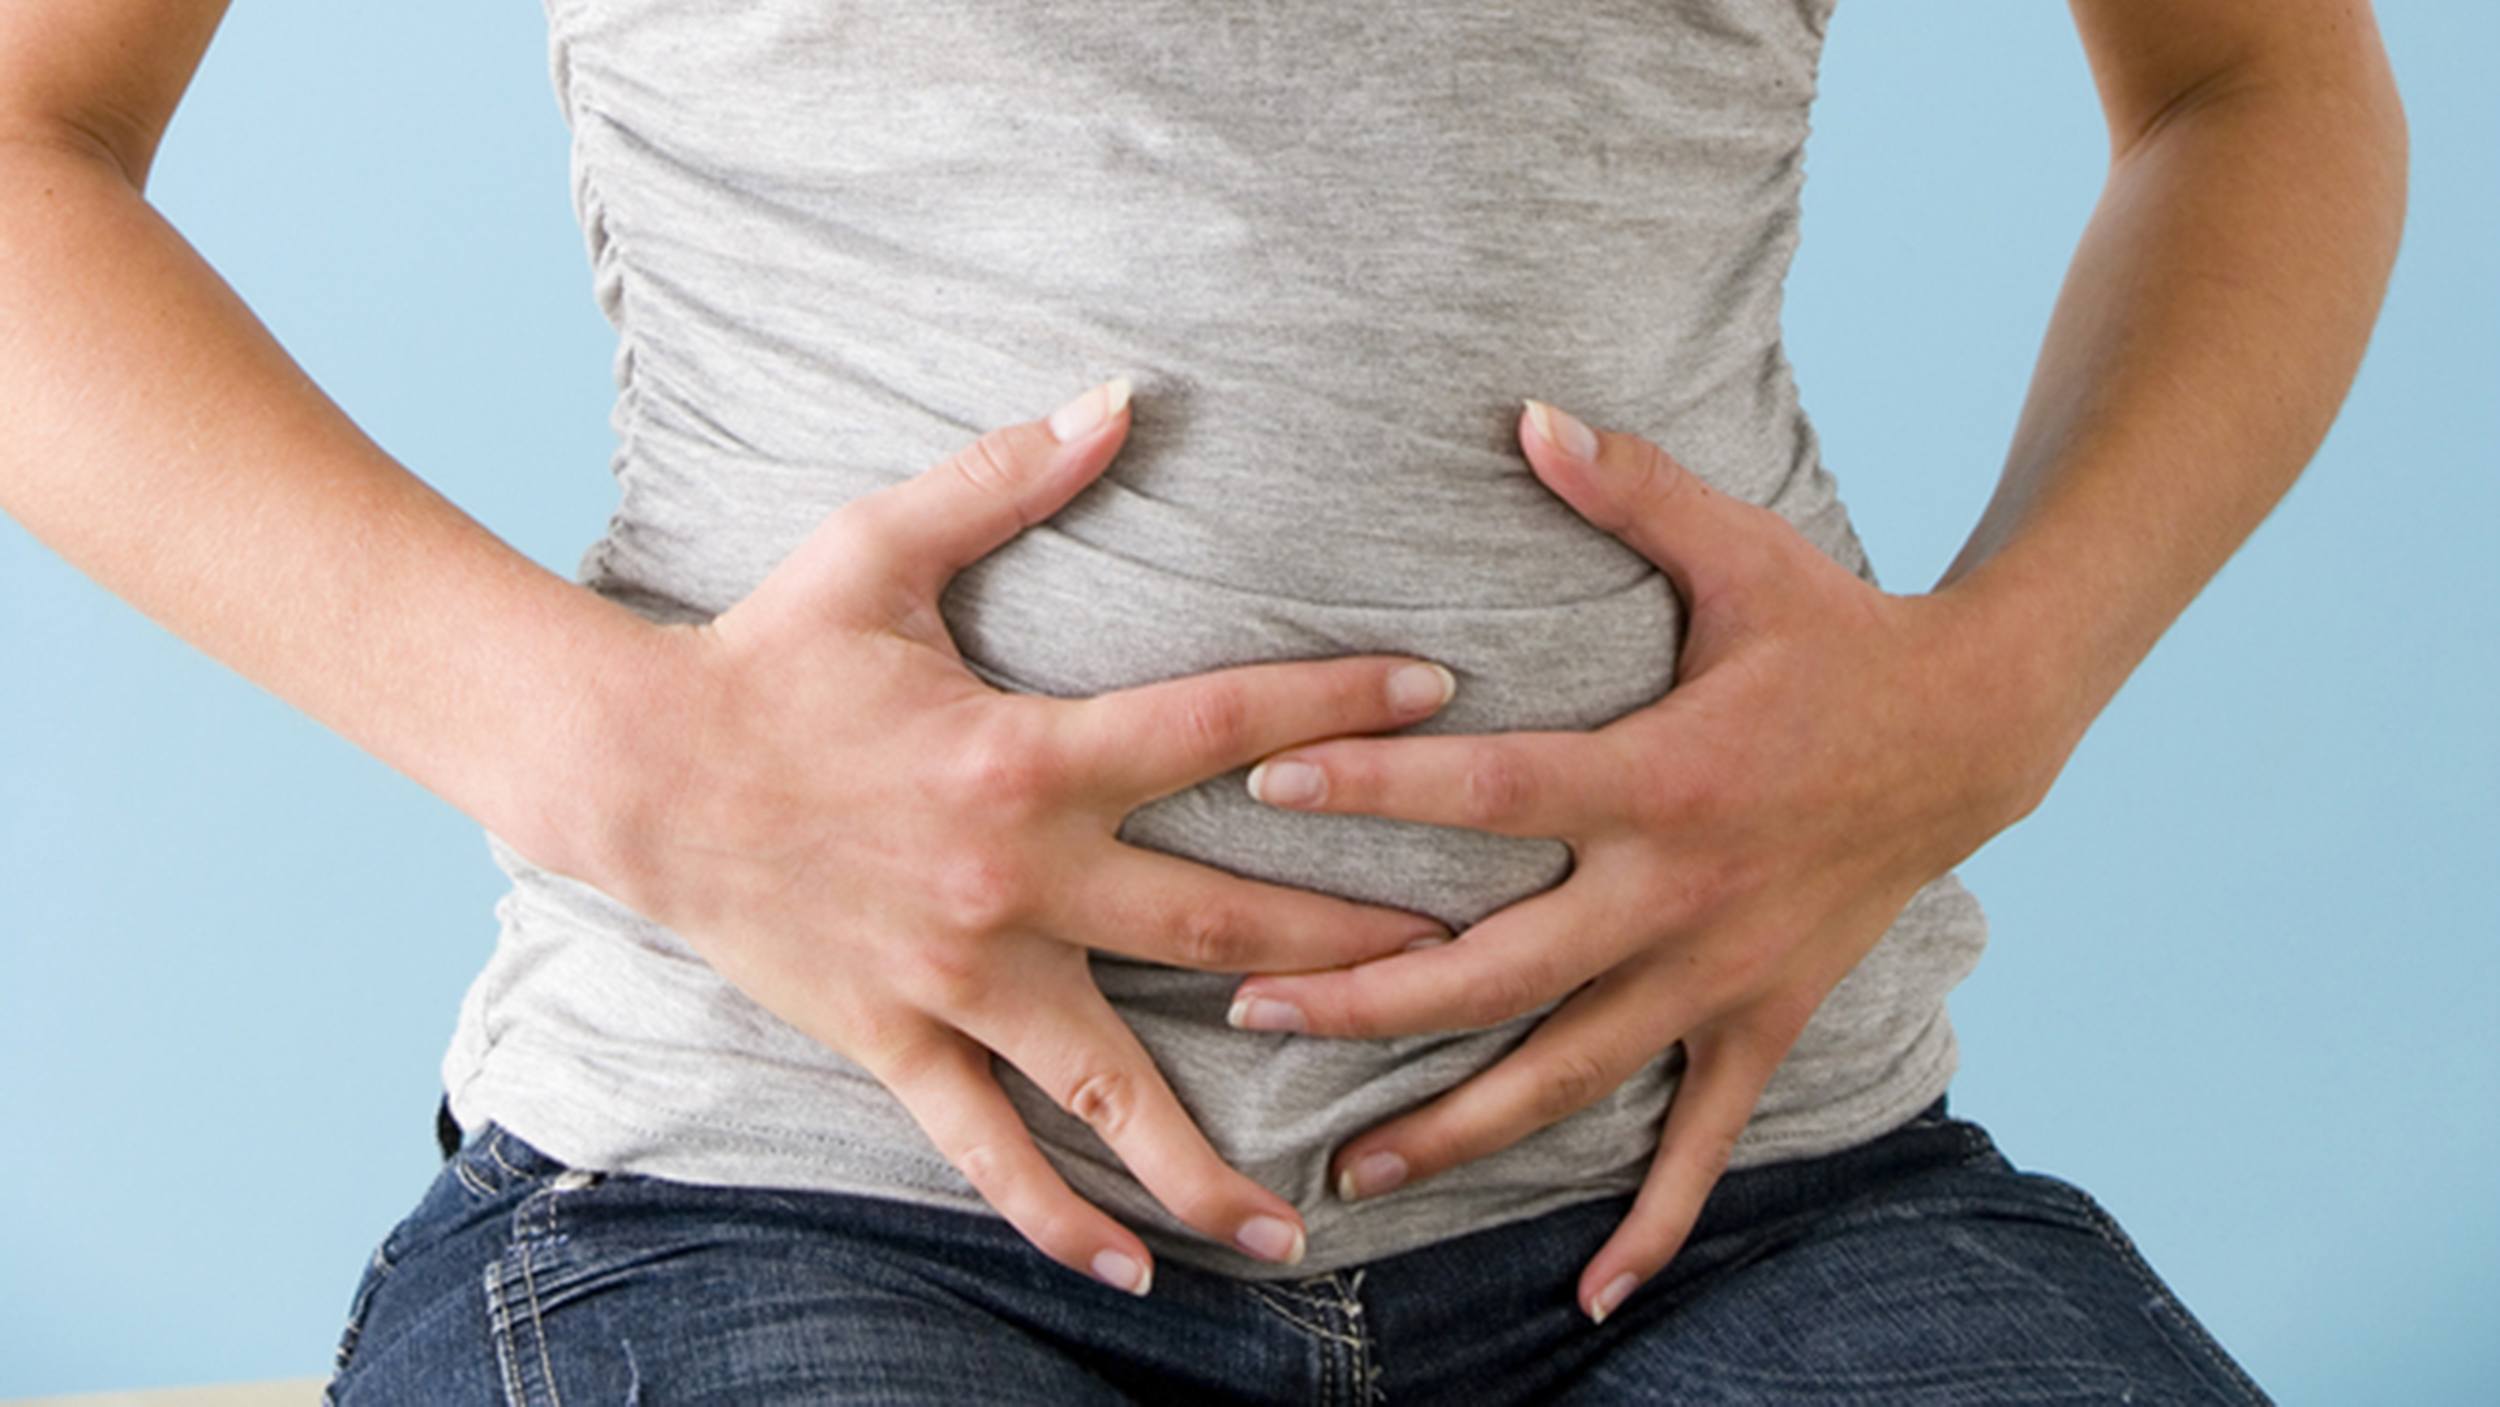 When Should You Seek Medical Help for a Bloated Stomach?